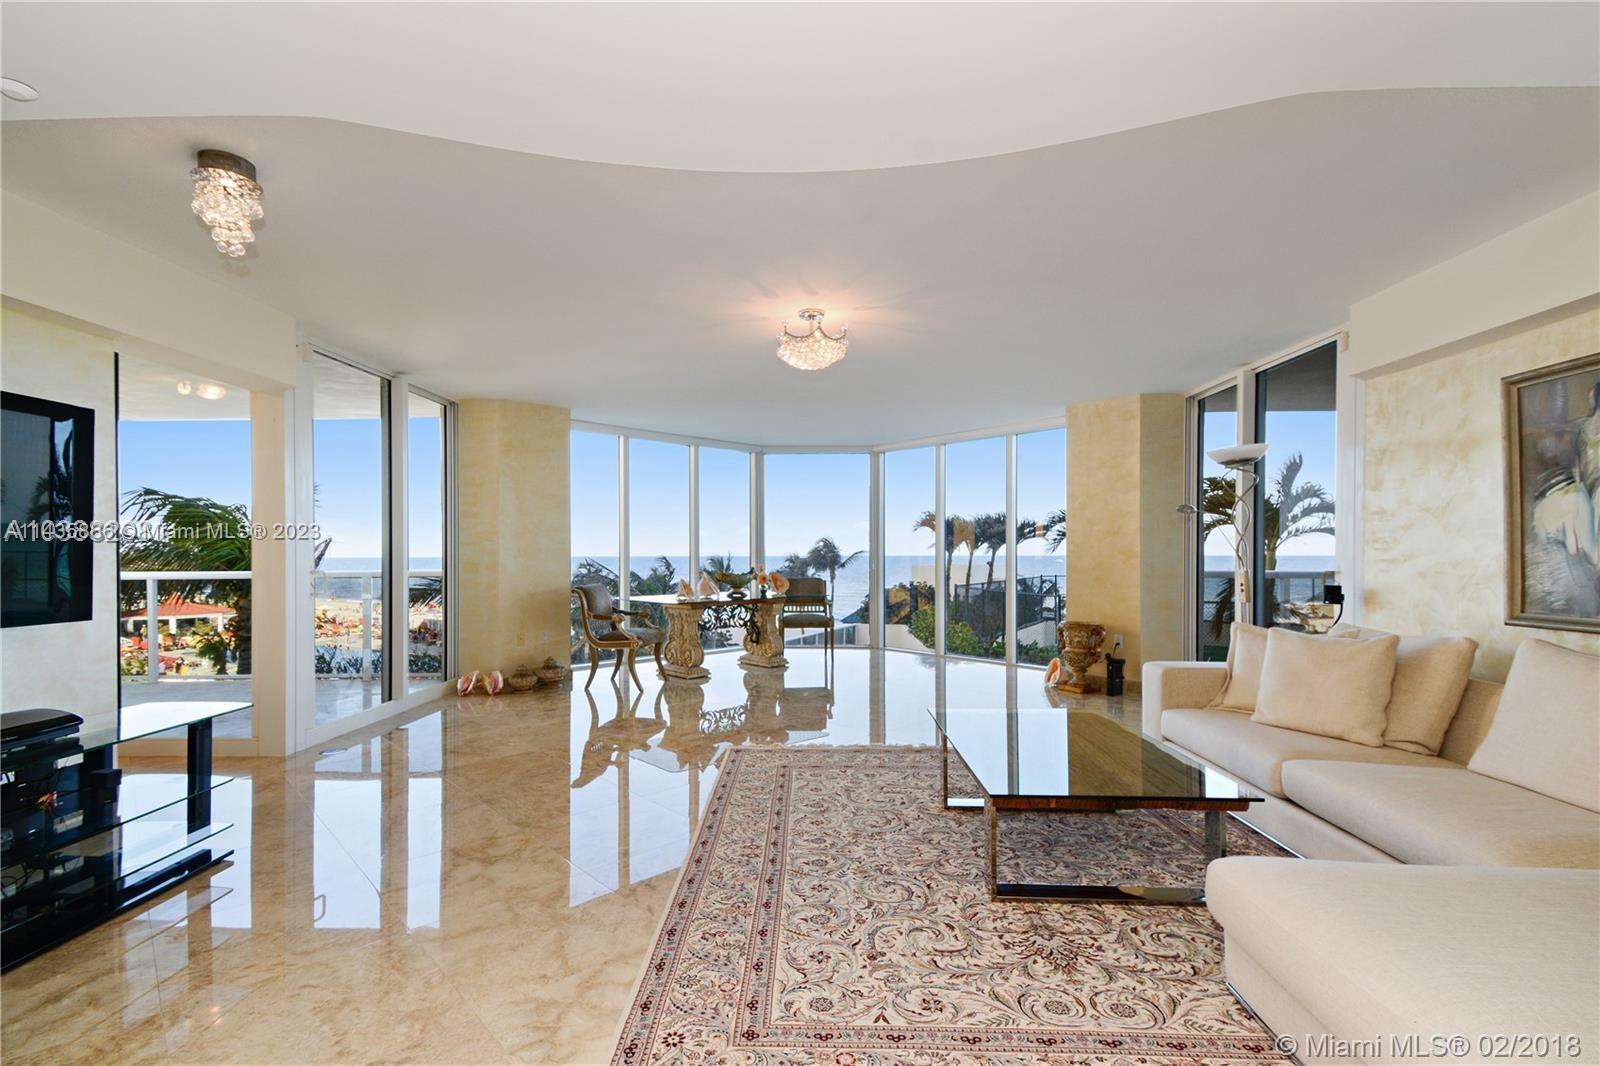 Ocean Front PANORAMIC VIEW CORNER RESIDENCE.  PRISTINE 3/br/4.5 bath with large walk-in closets, 266